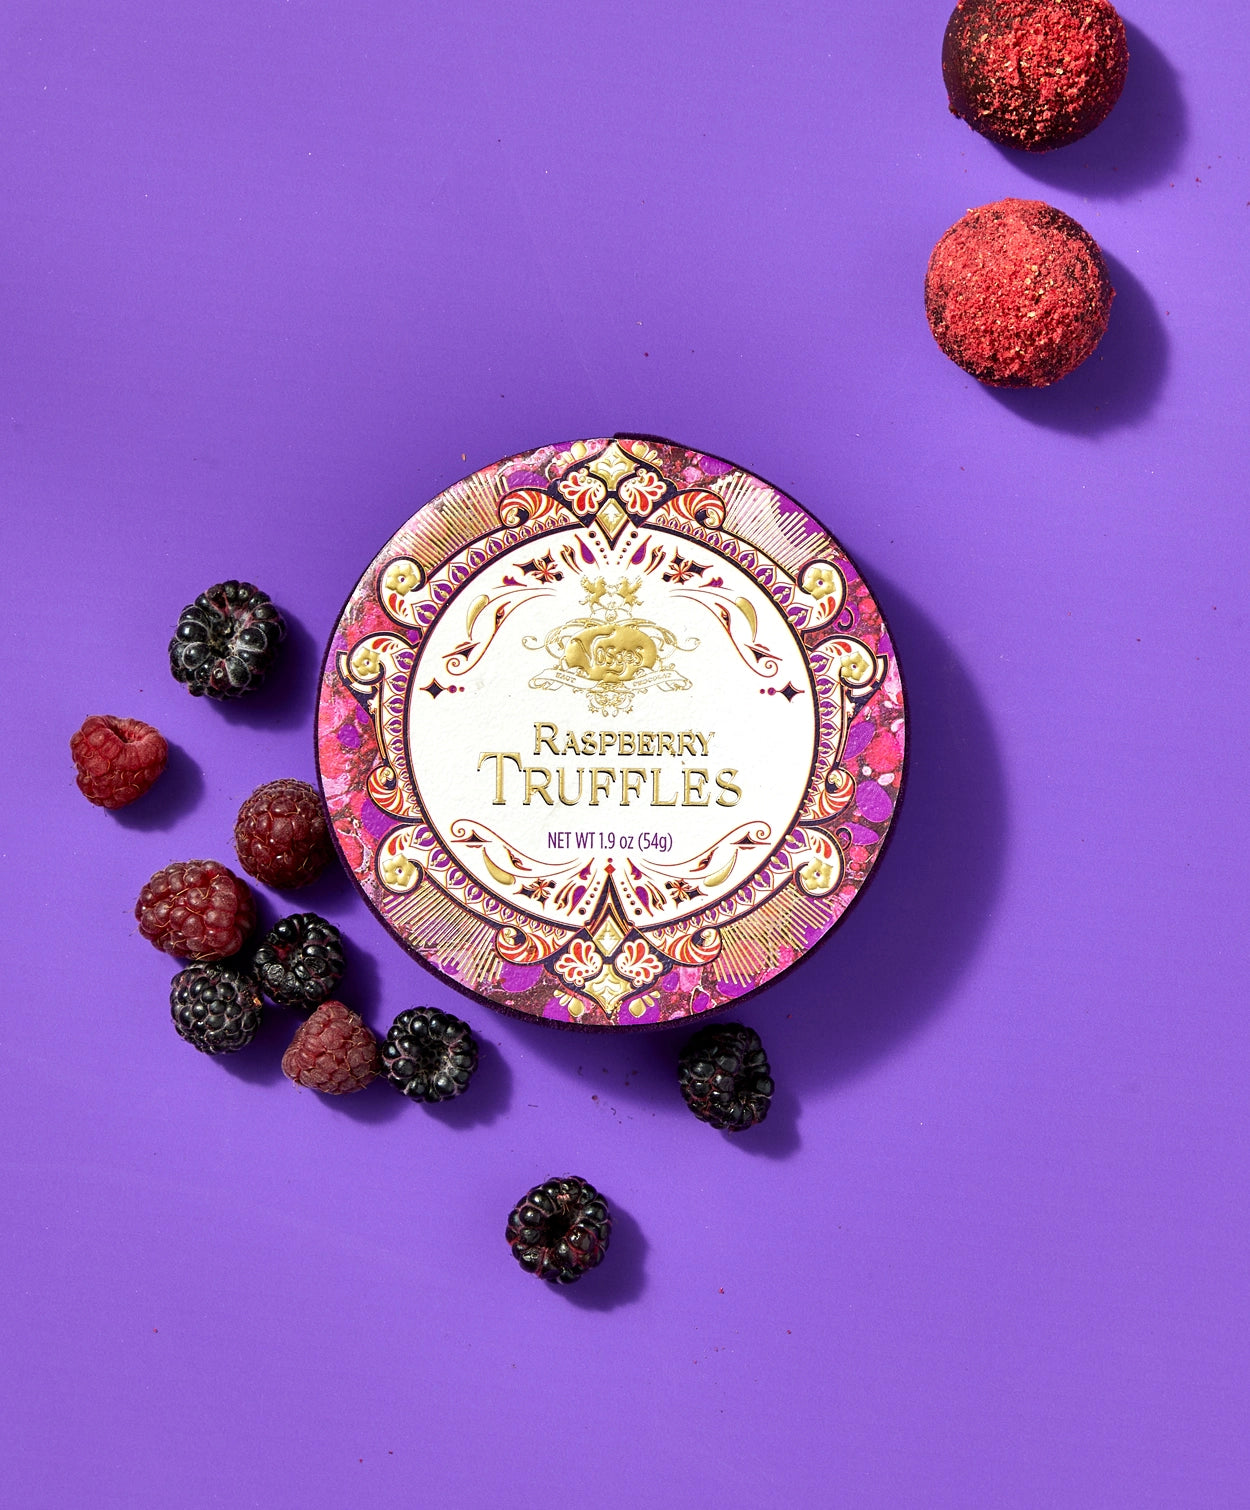 A round Vosges chocolate box decorated in bright red, pink and gold foil sits beside several fresh raspberries and Vosges Raspberry truffles, on a light purple background.